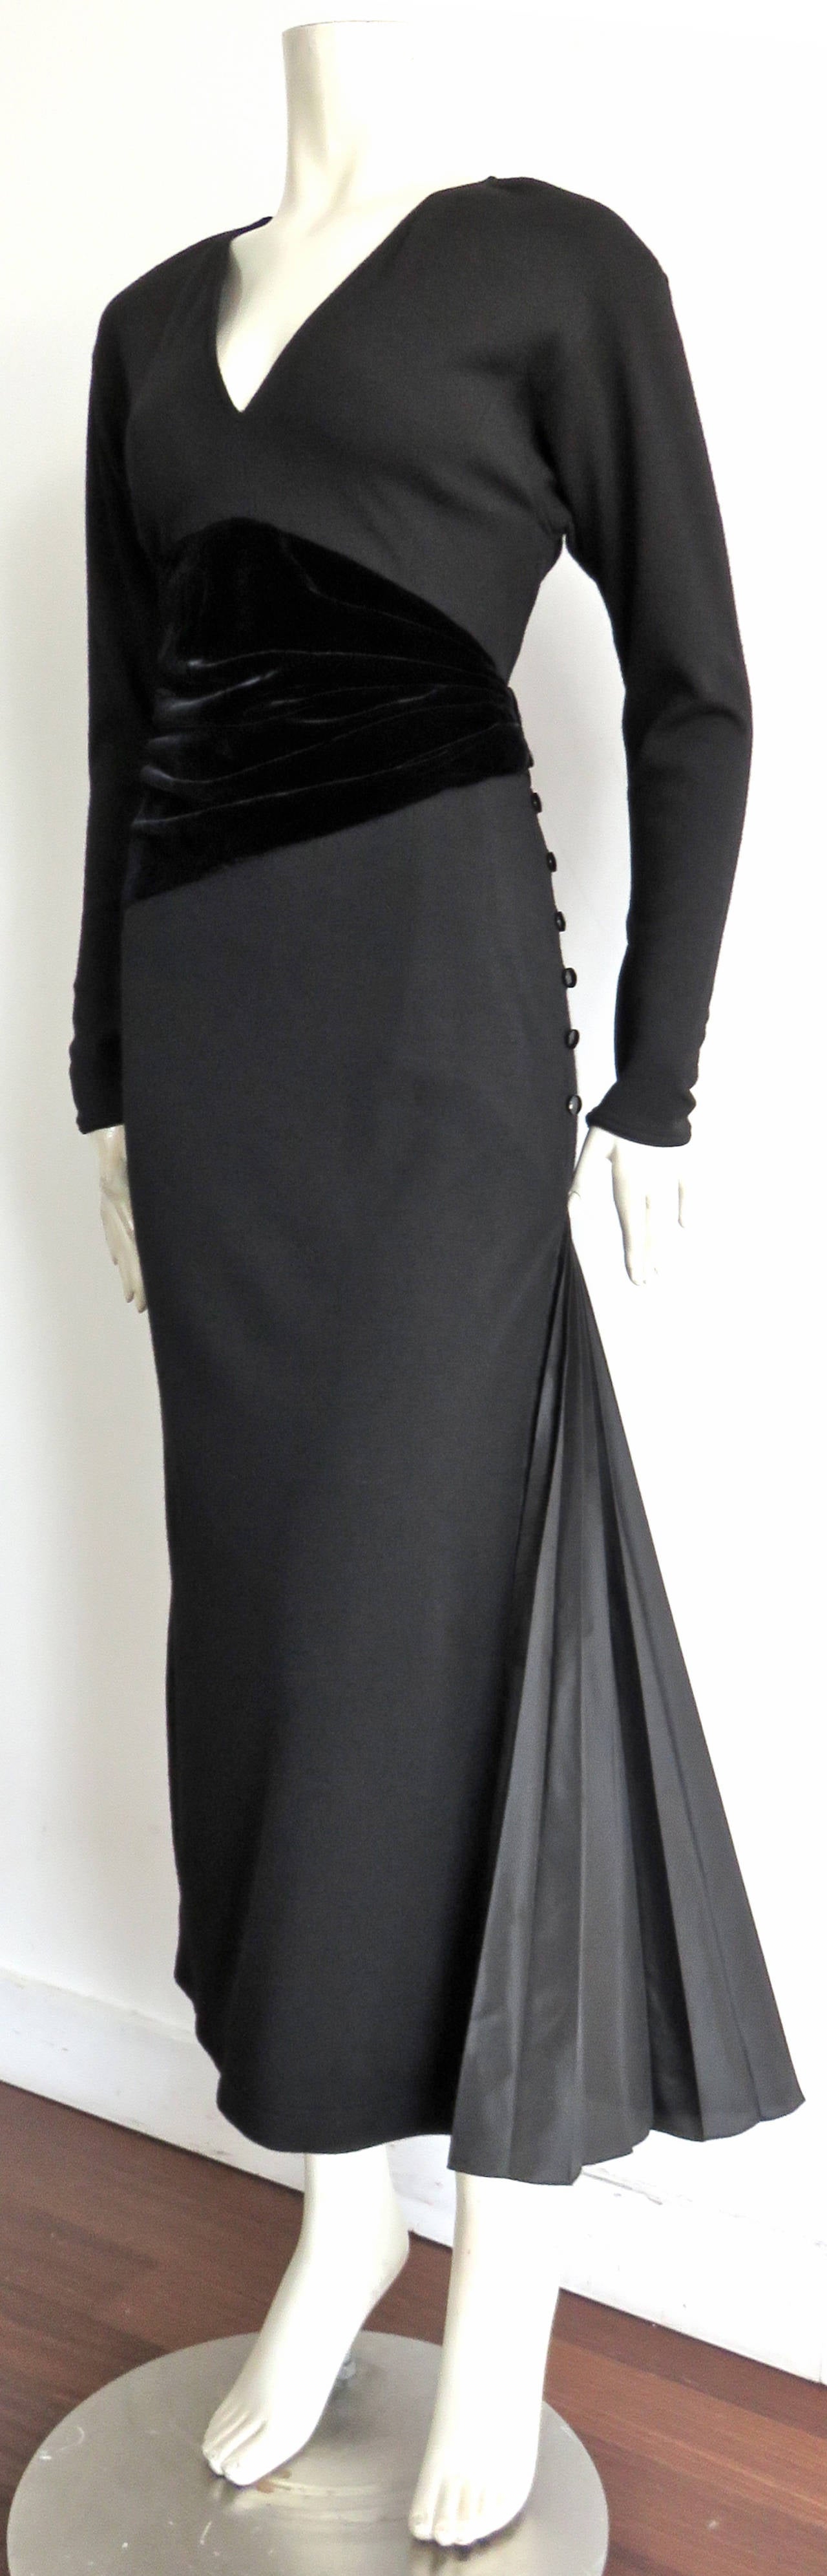 Designed by Emanuel Ungaro in France during the 1980's, this stunning dress is made of black, wool knit jersey with, gathered, silk velvet inset detail at the waist.  The bottom left of the dress features a pleated, silk taffeta gusset detail  that